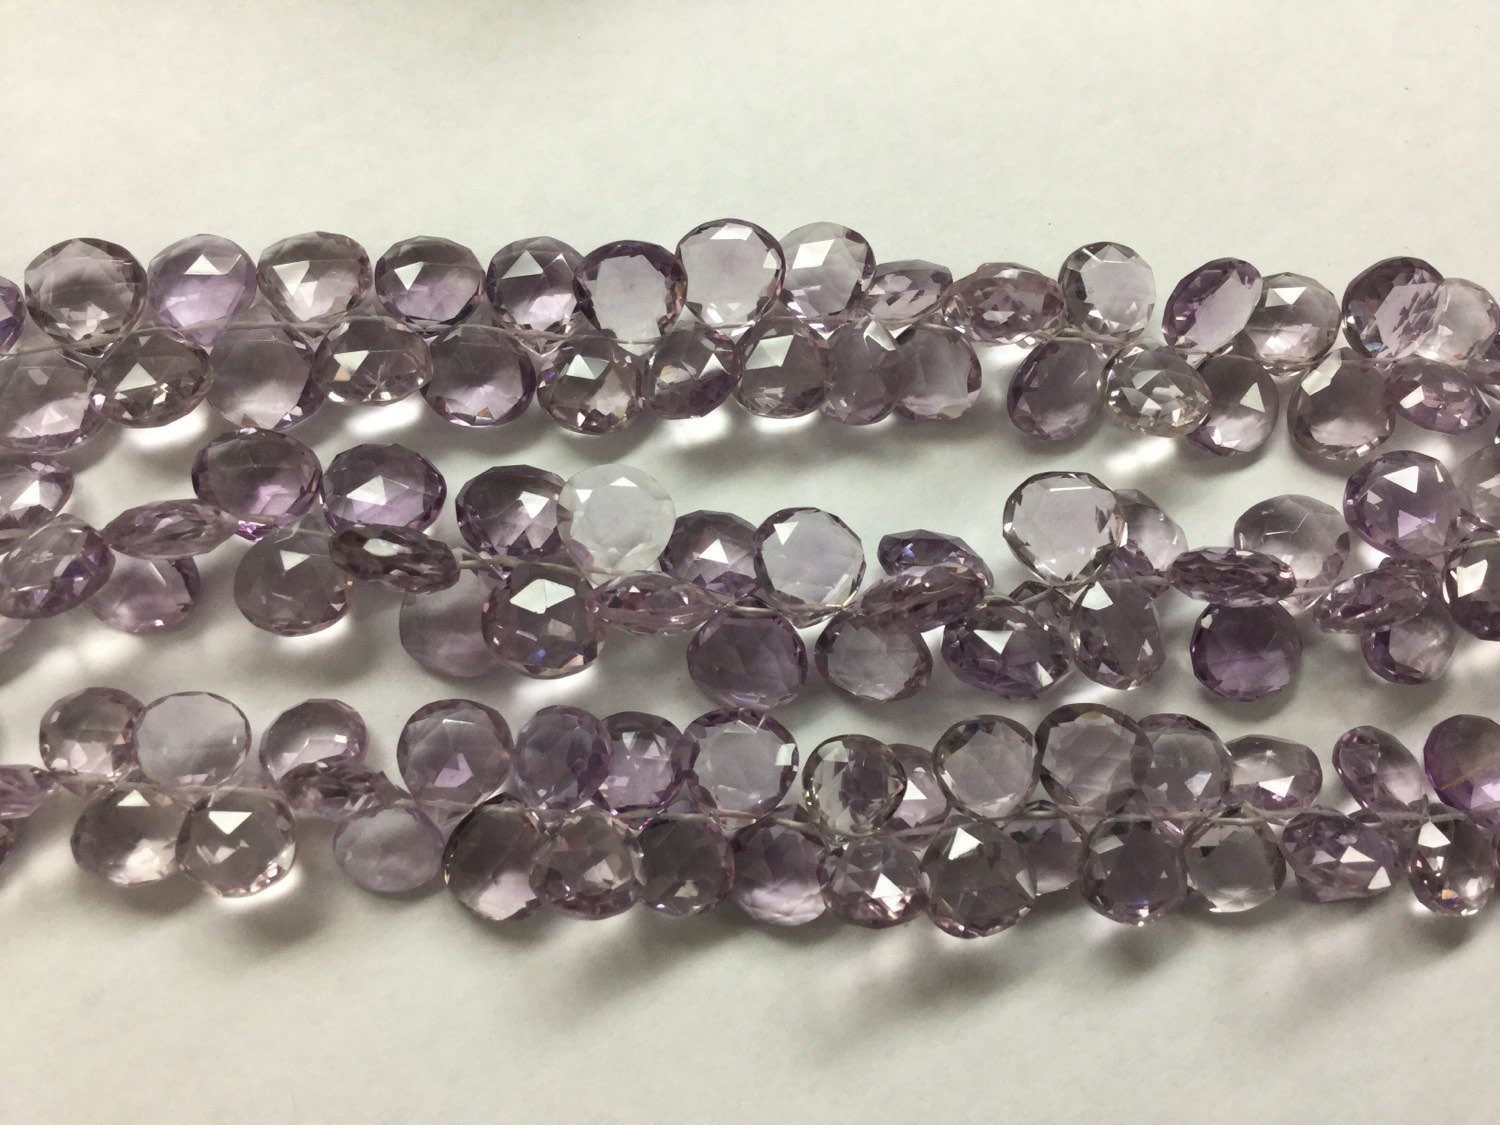 Pink Amethyst Hydro Quartz Hearts Faceted